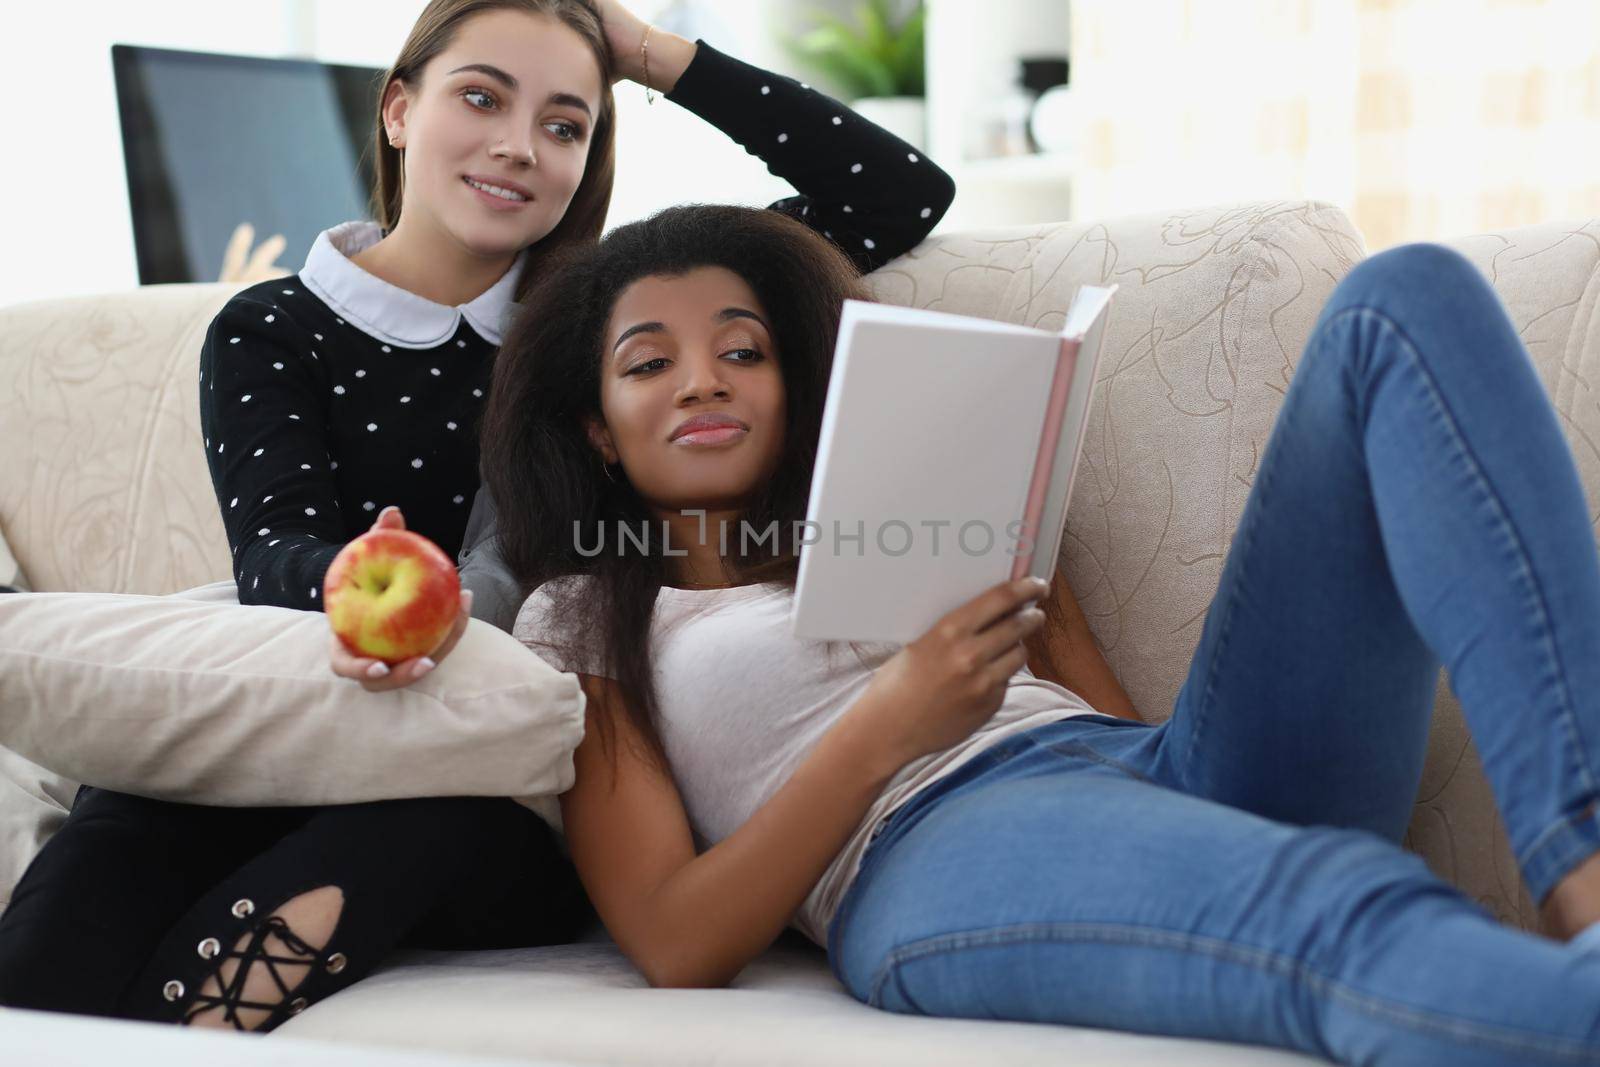 Best friends reading book chilling on sofa, apple for snack, relaxing atmosphere by kuprevich